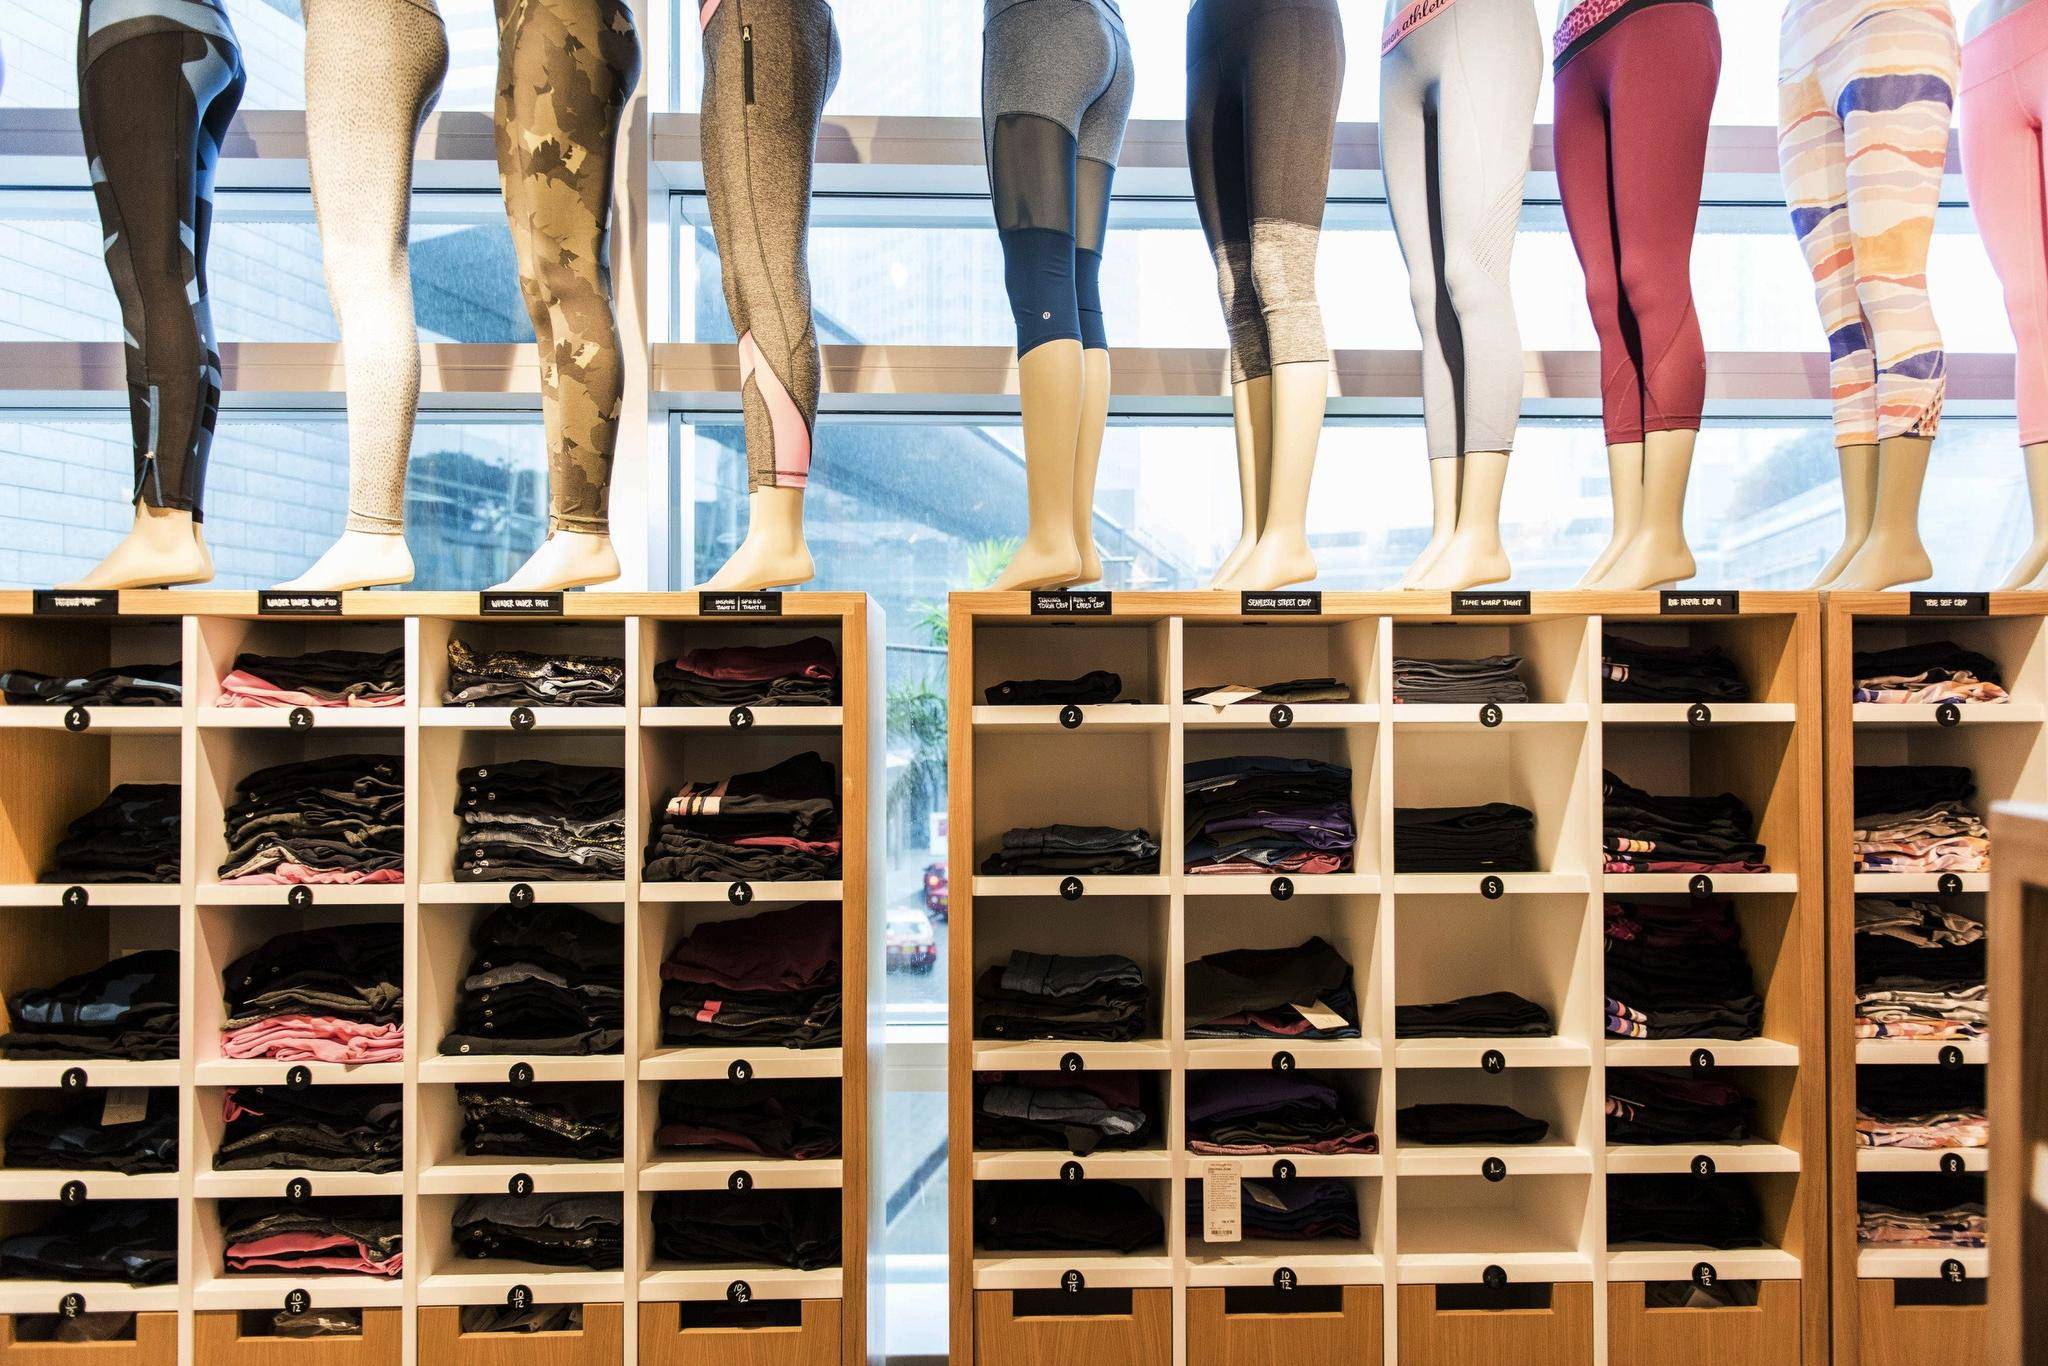 Lululemon: the leggings to show-off in